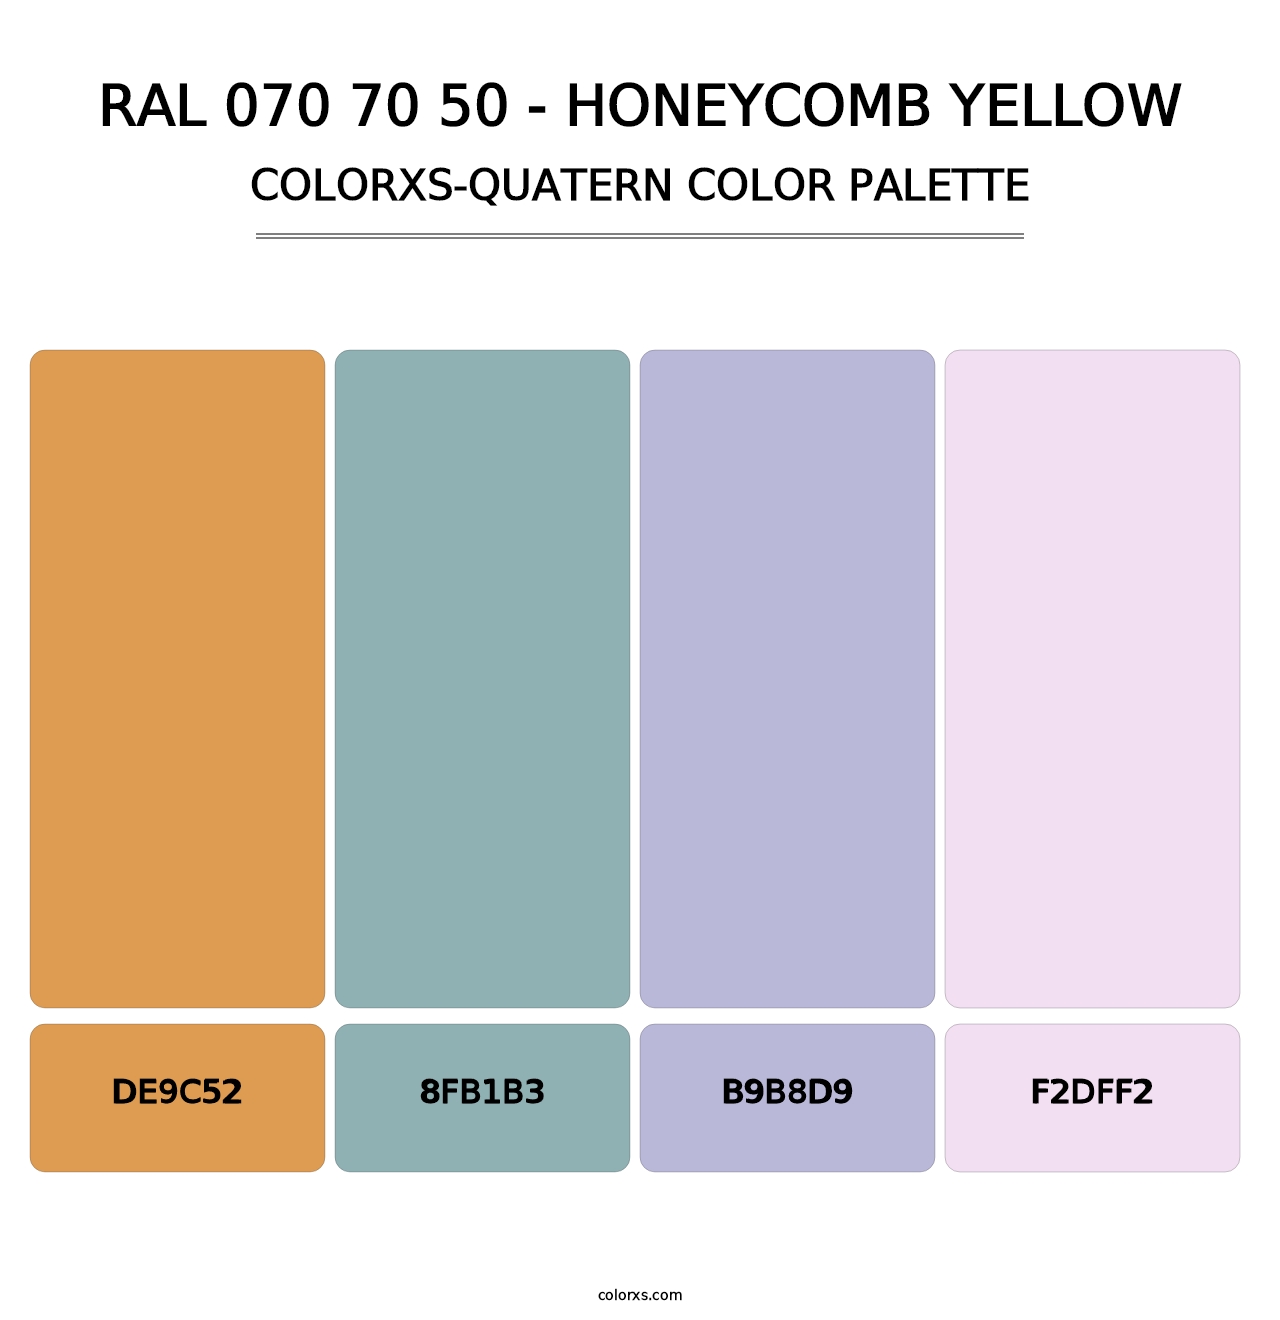 RAL 070 70 50 - Honeycomb Yellow - Colorxs Quatern Palette